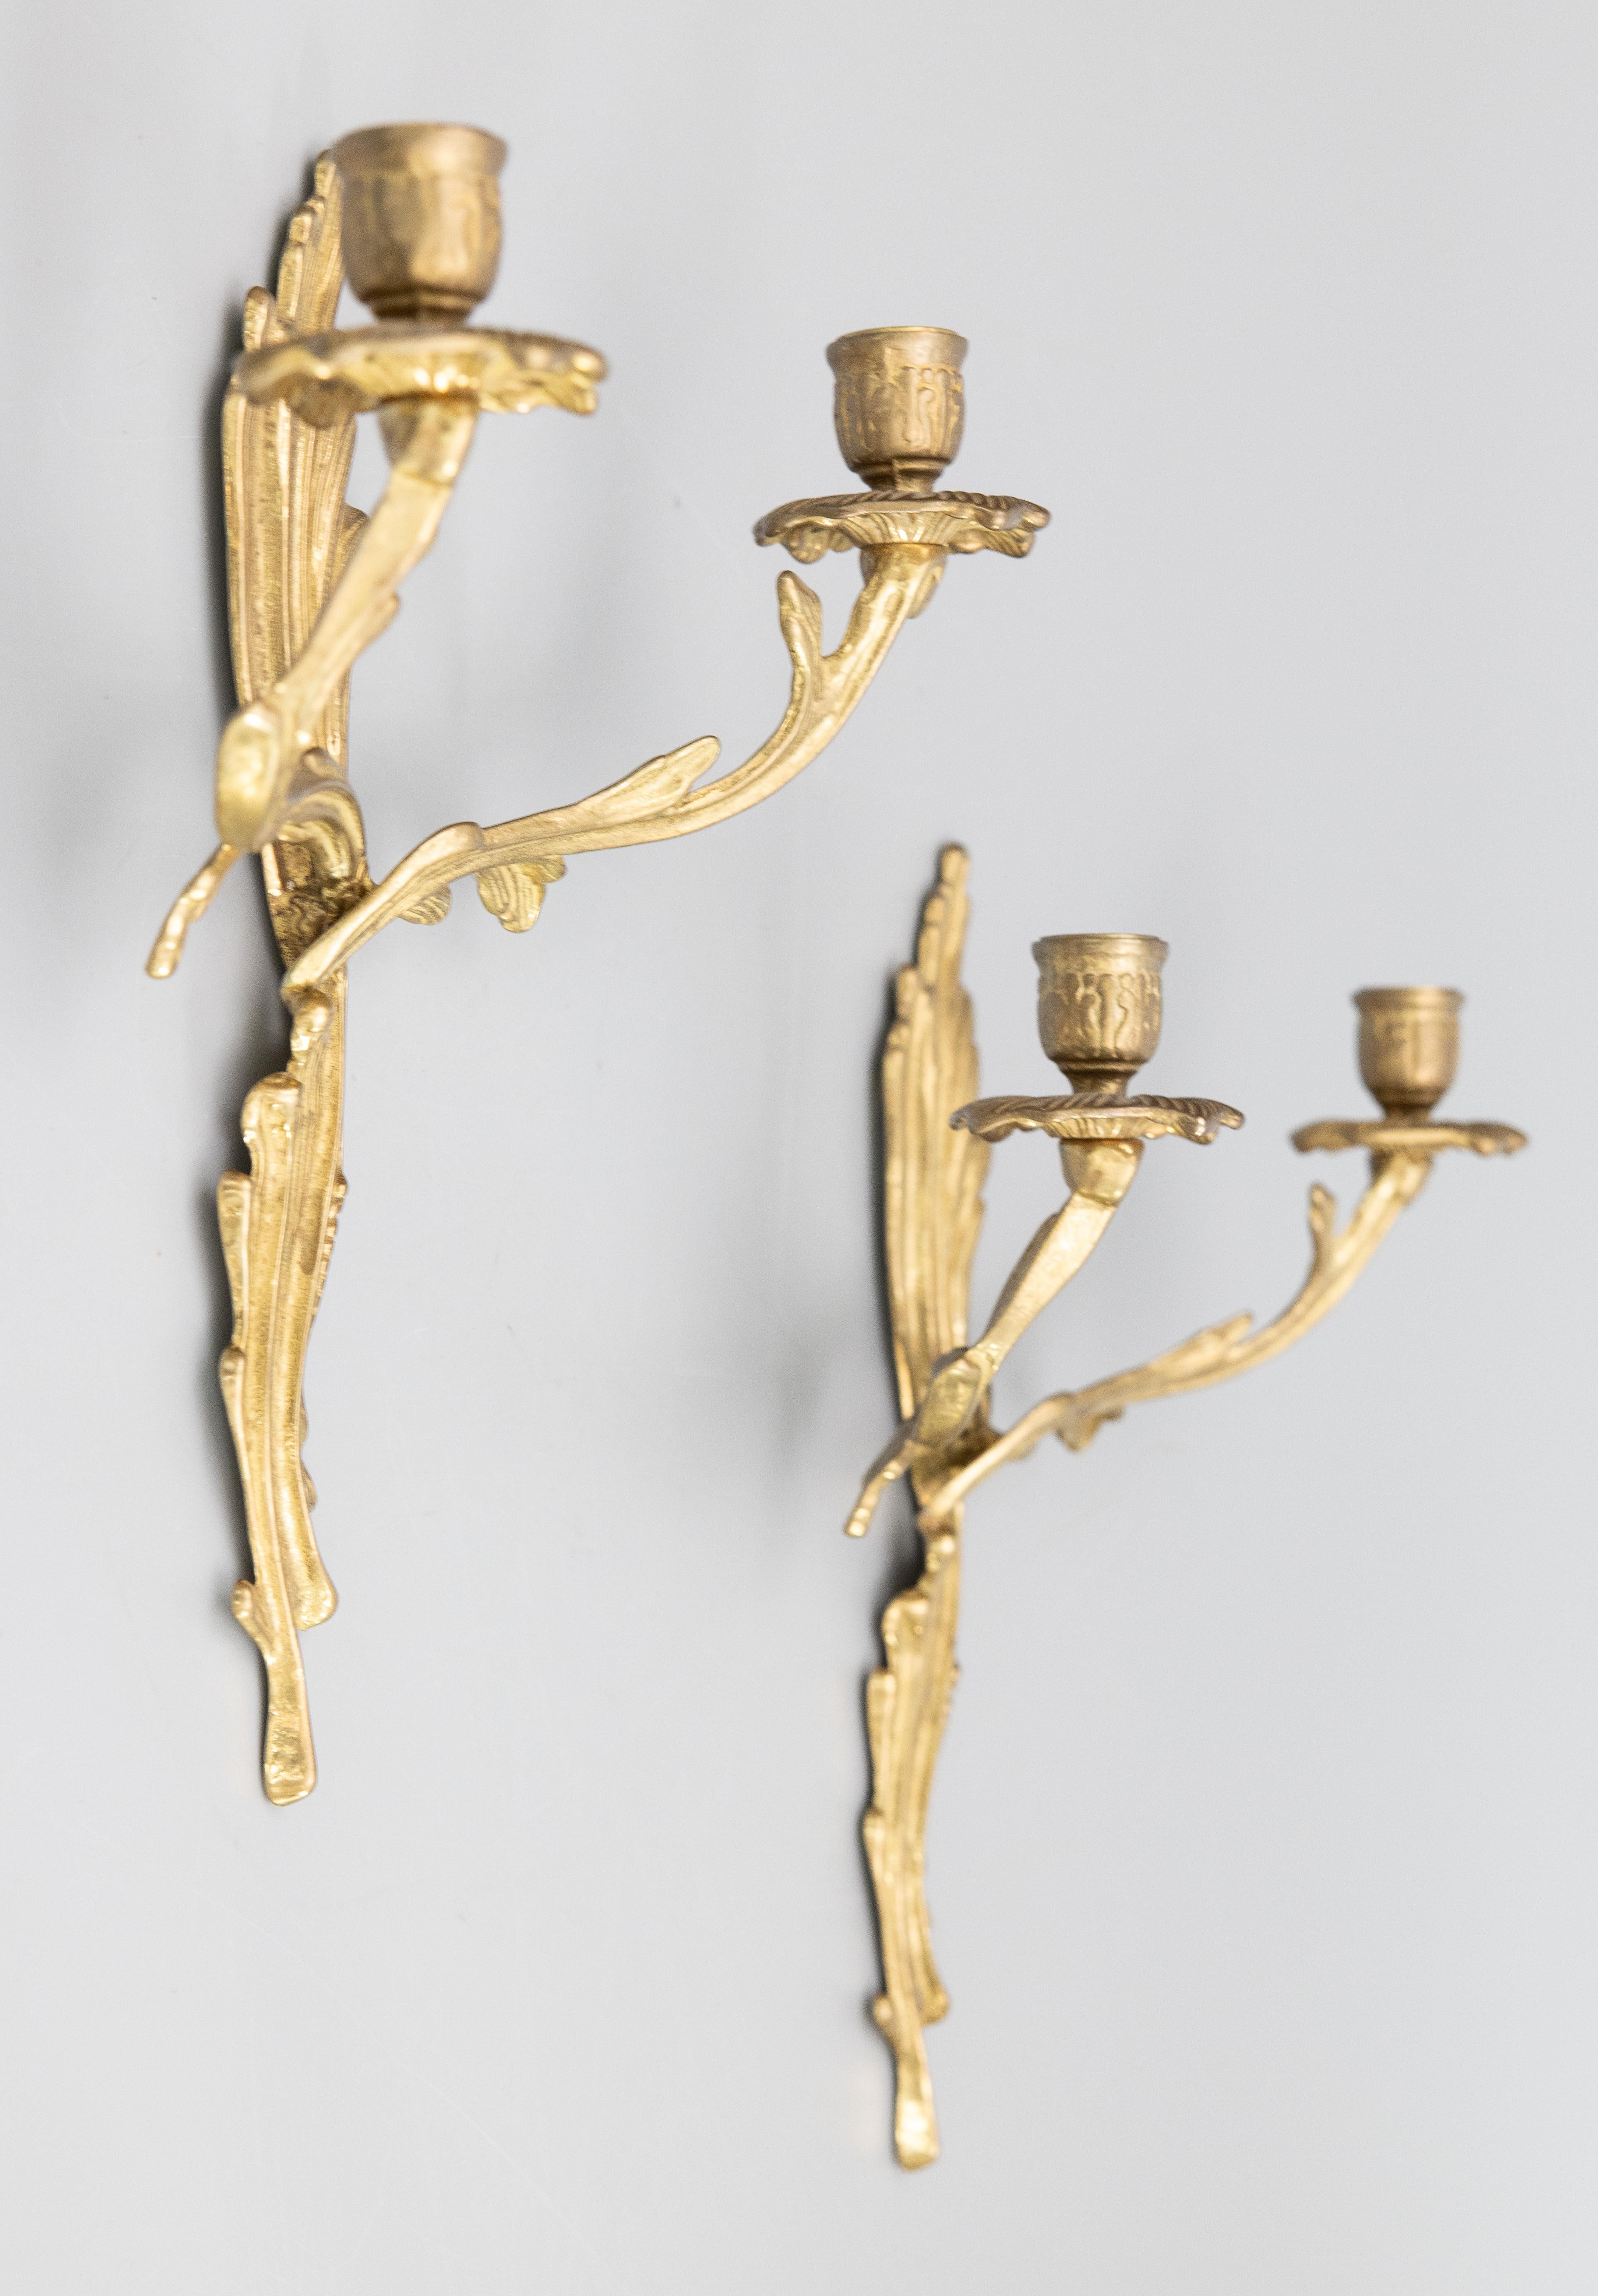 Pair of Antique French Rococo Style Gilt Brass Candelabras Wall Candle Sconces For Sale 1